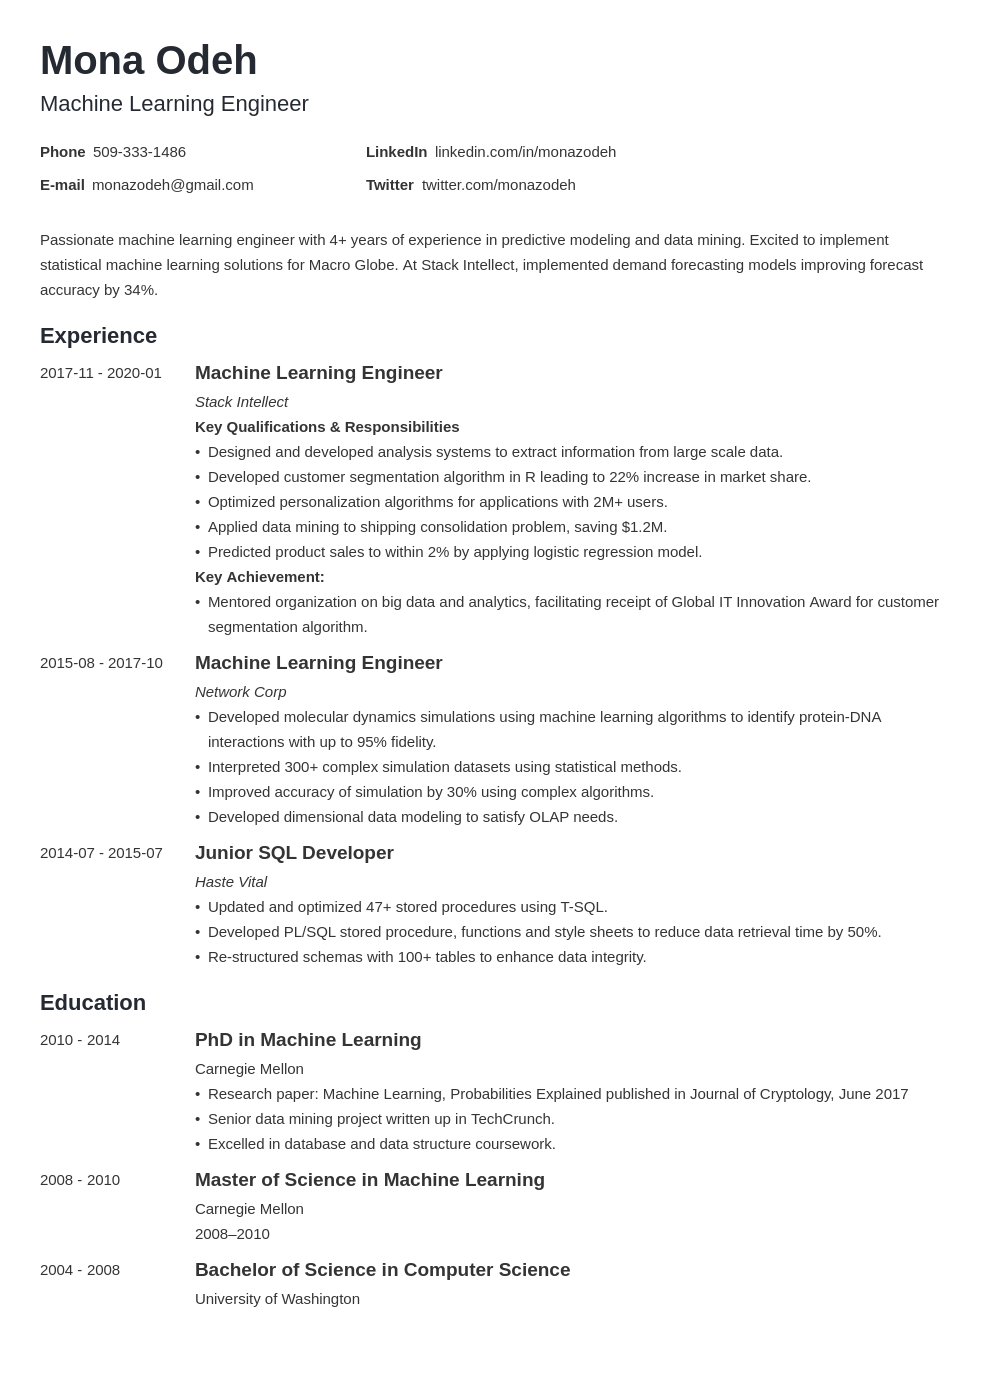 Machine Learning Resume: Samples and Writing Guide